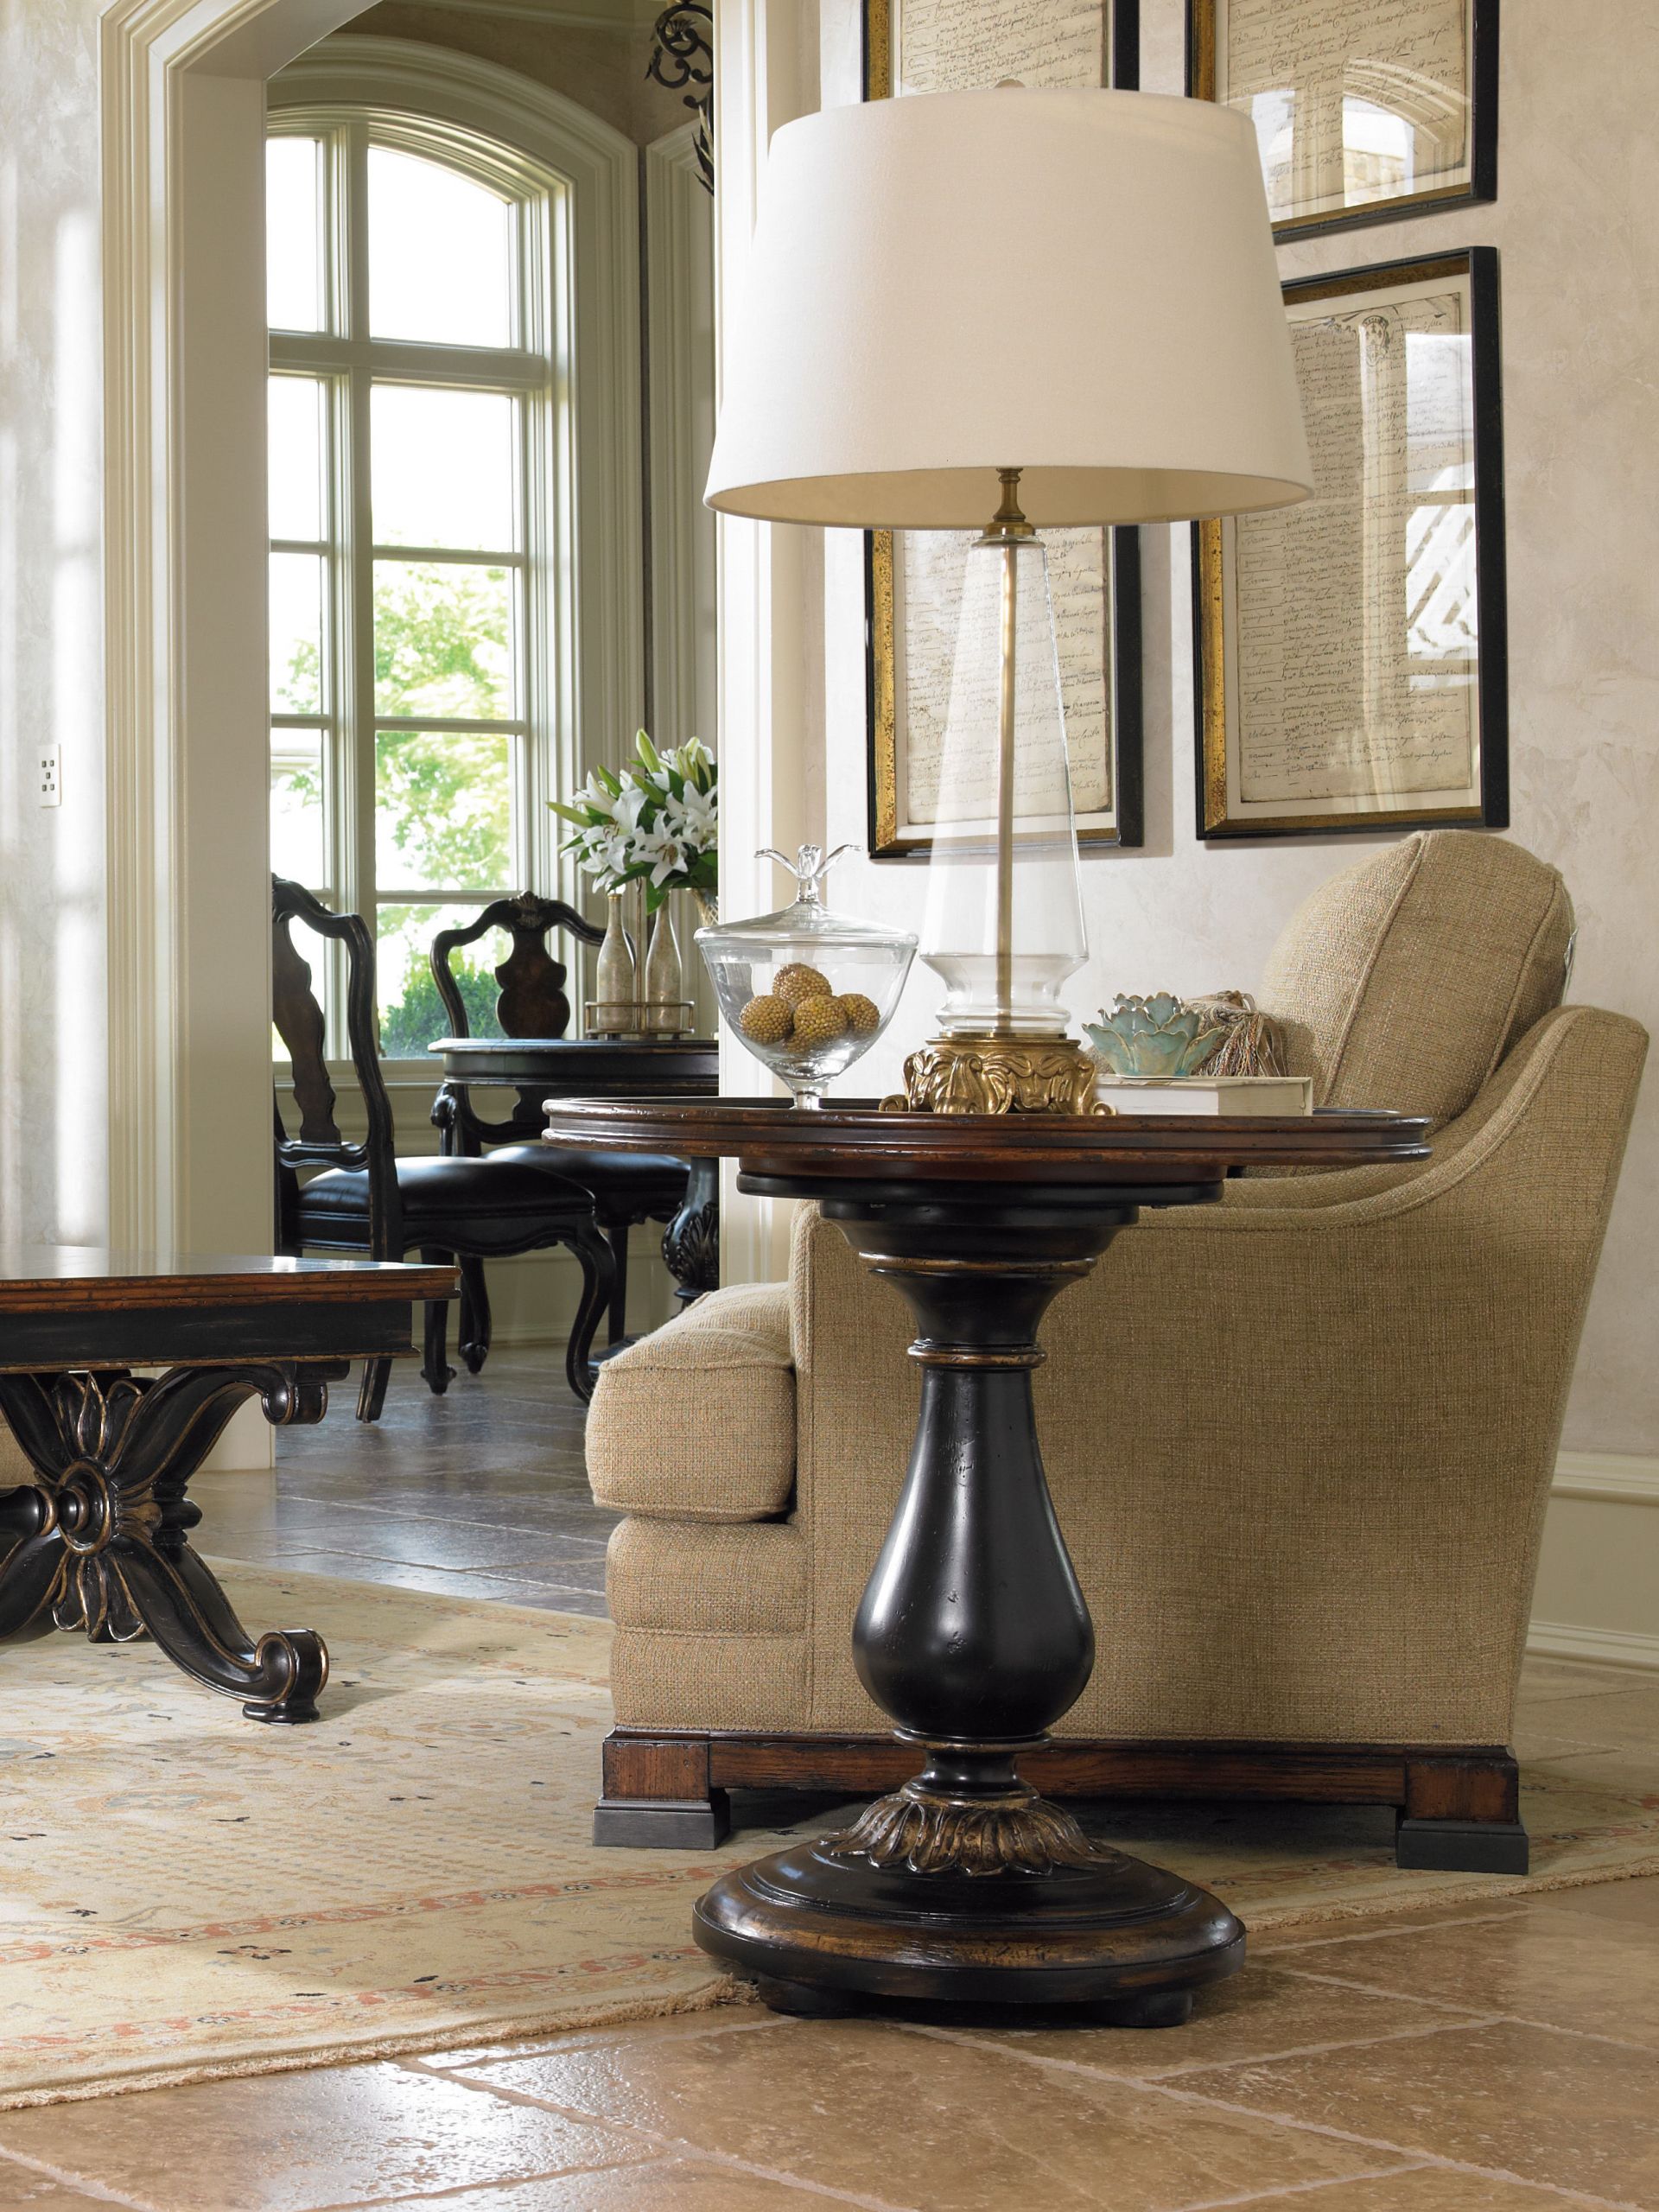 Accent Living Room Tables
 Hooker Furniture Living Room Grandover Round Accent Table